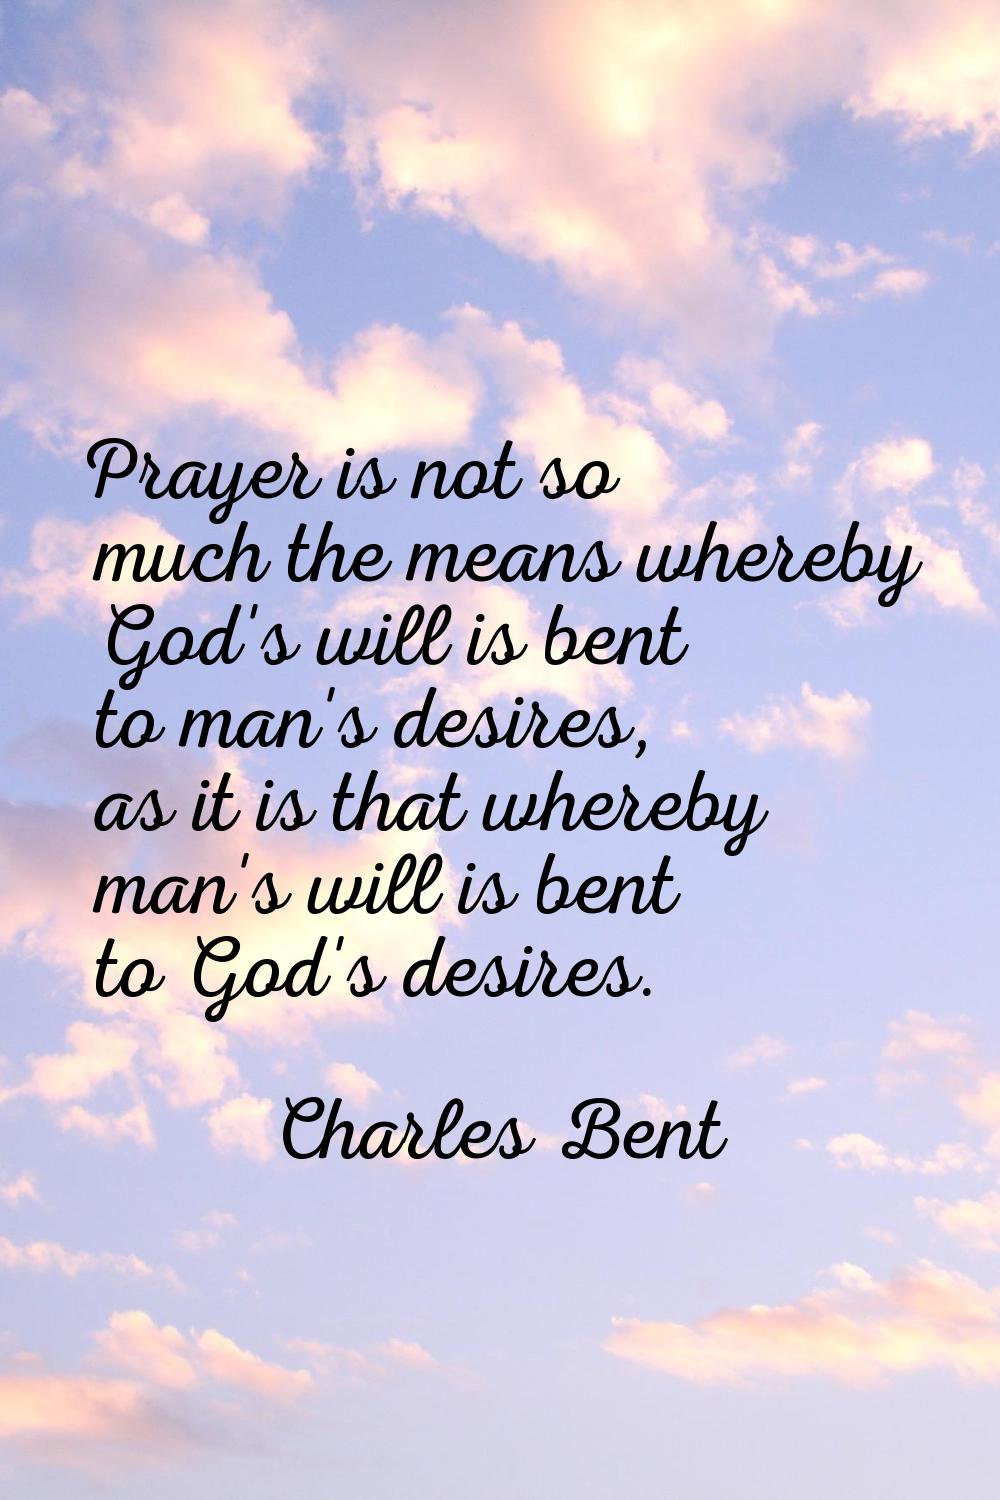 Prayer is not so much the means whereby God's will is bent to man's desires, as it is that whereby 